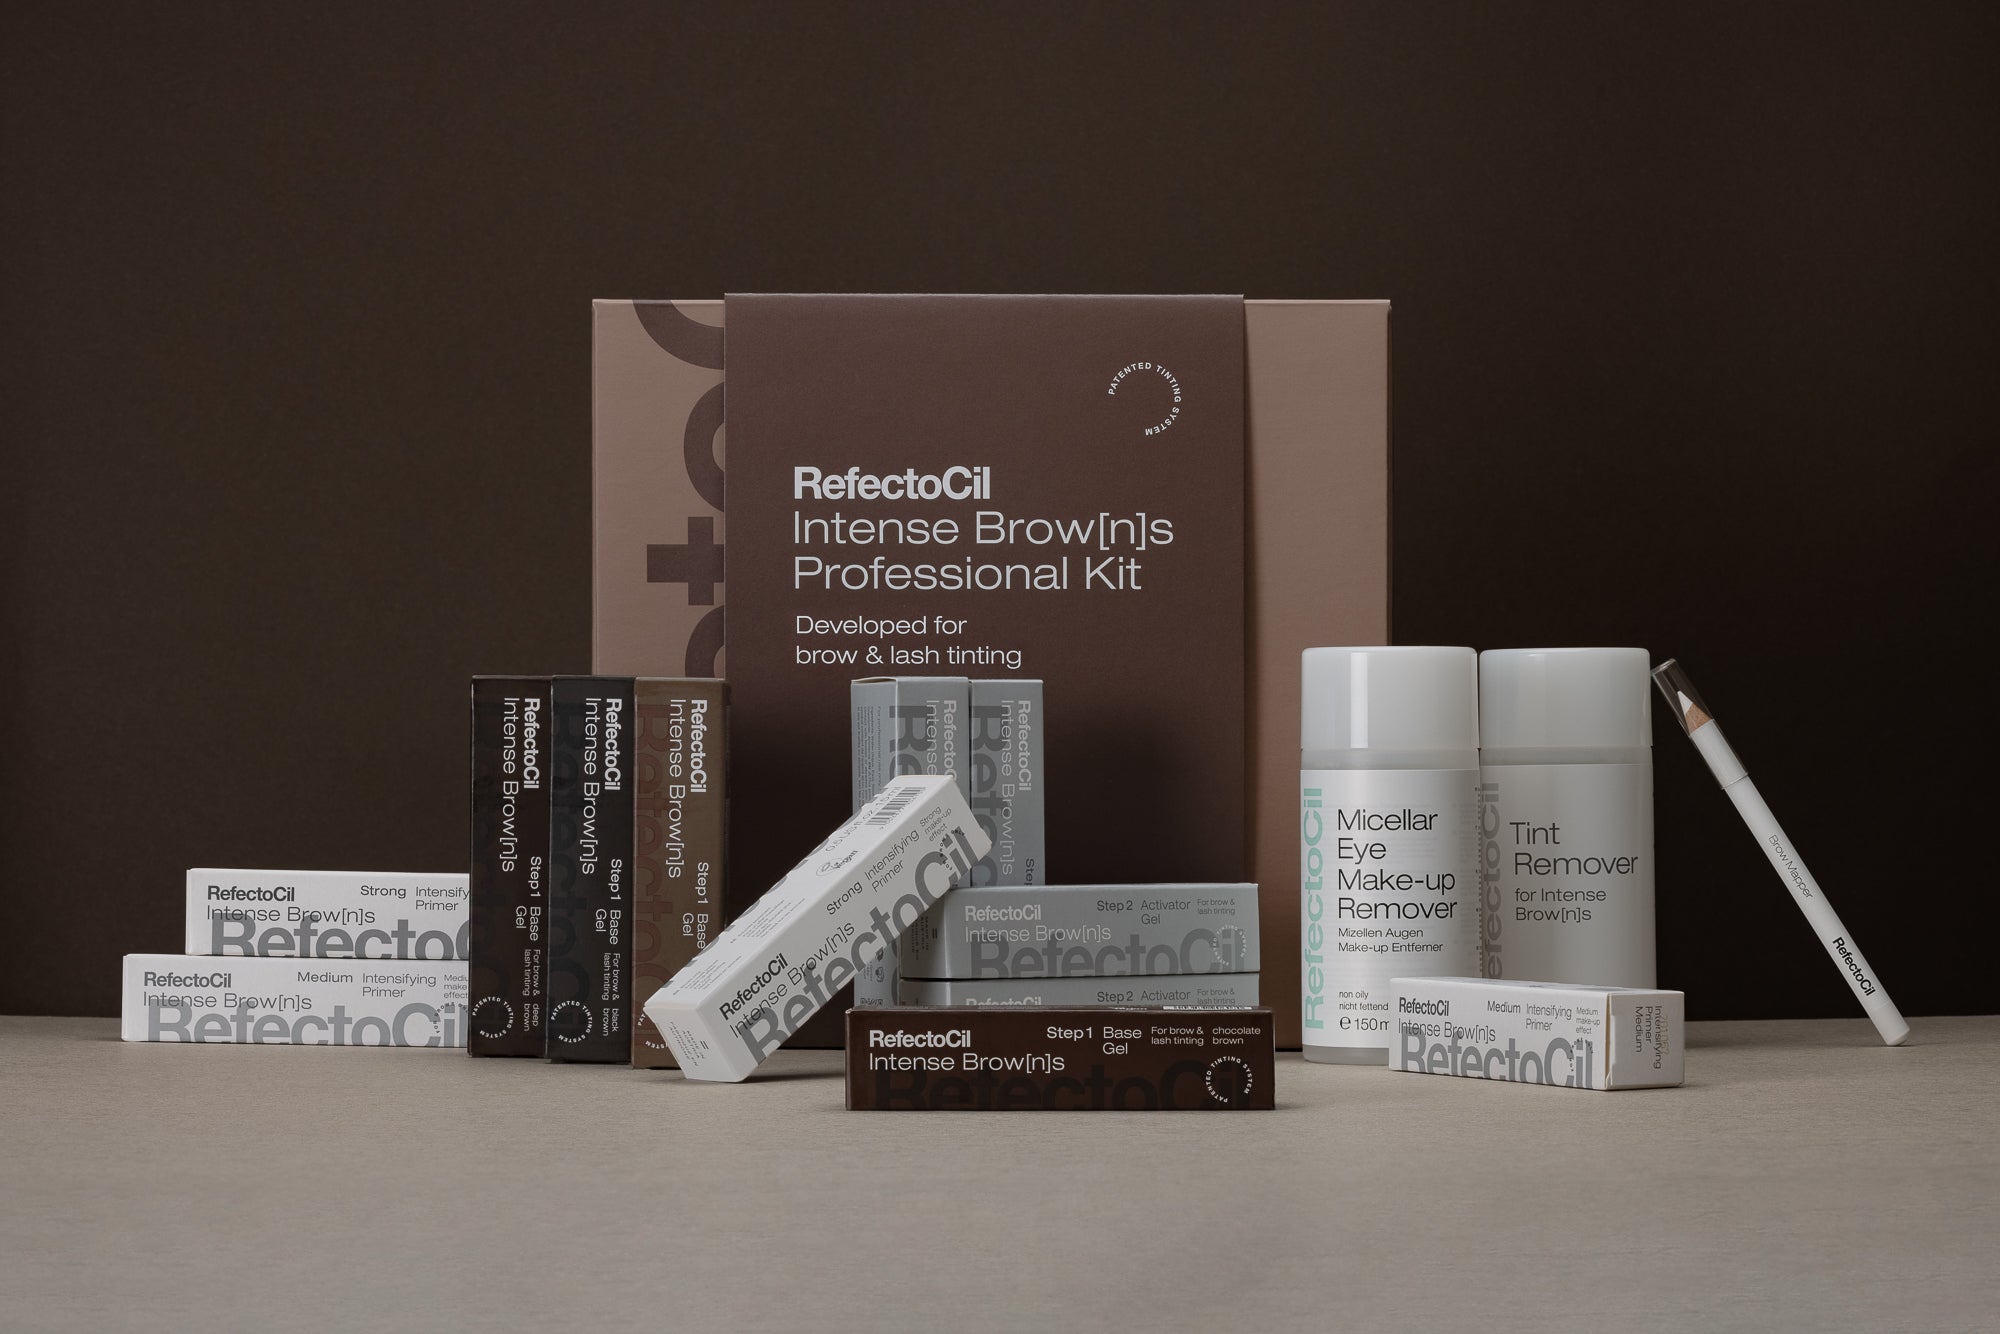 RefectoCil Intense Brow[n]s Kit - Creata Beauty - Professional Beauty Products